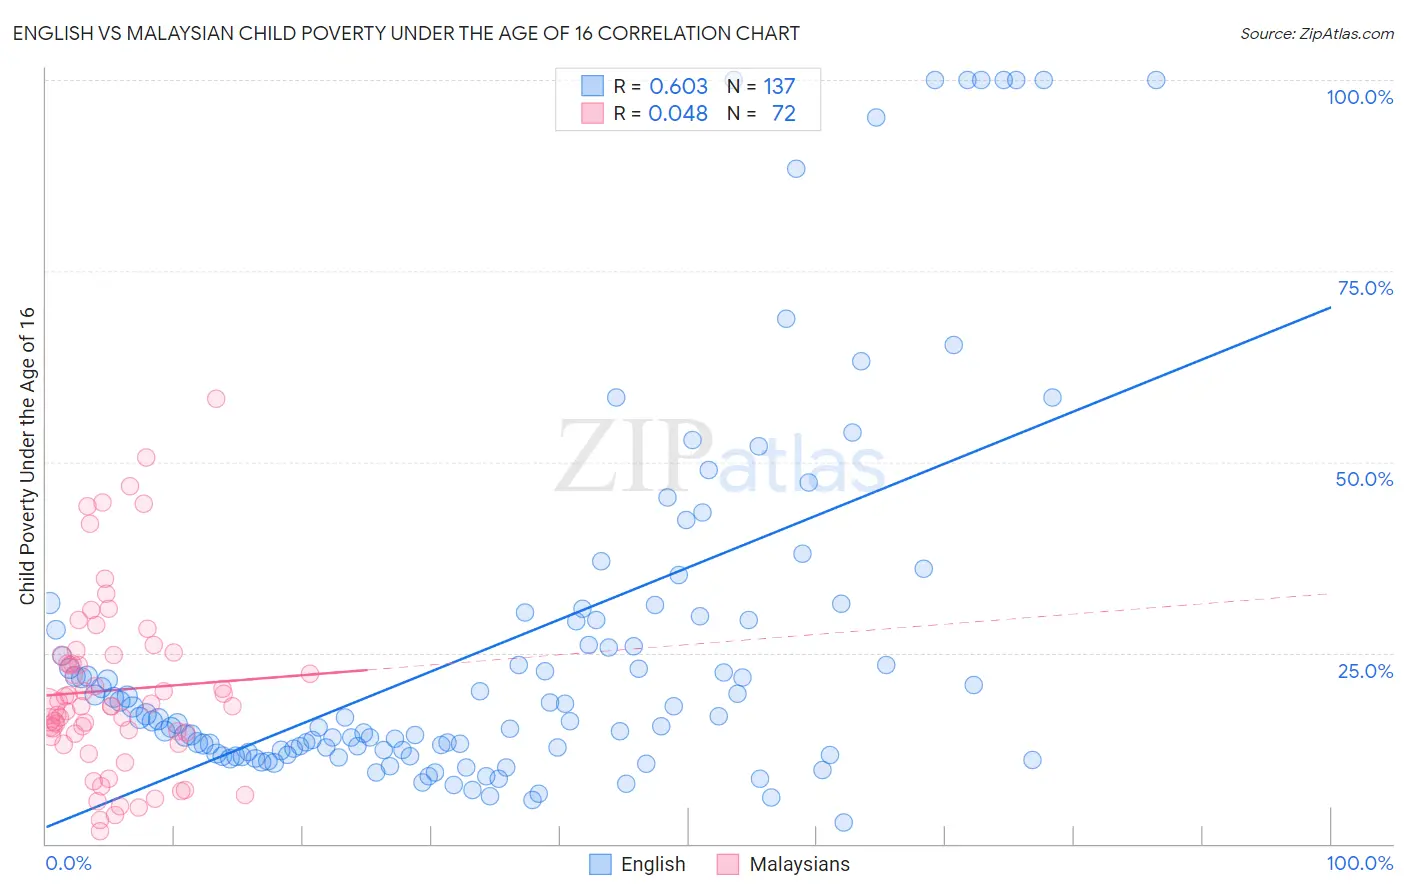 English vs Malaysian Child Poverty Under the Age of 16